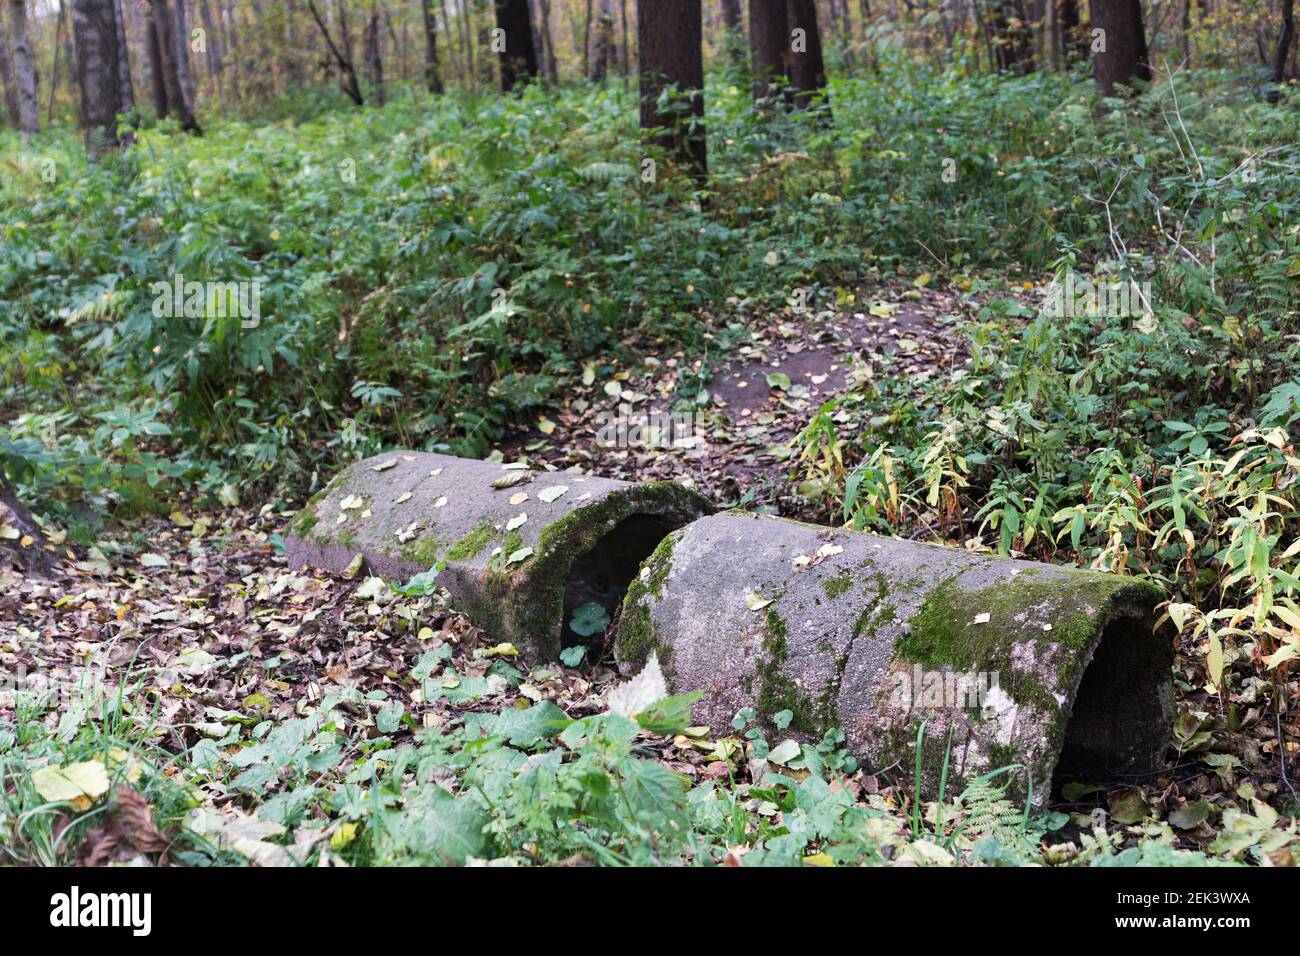 Ruin of concrete pipe culvert on path in park Stock Photo